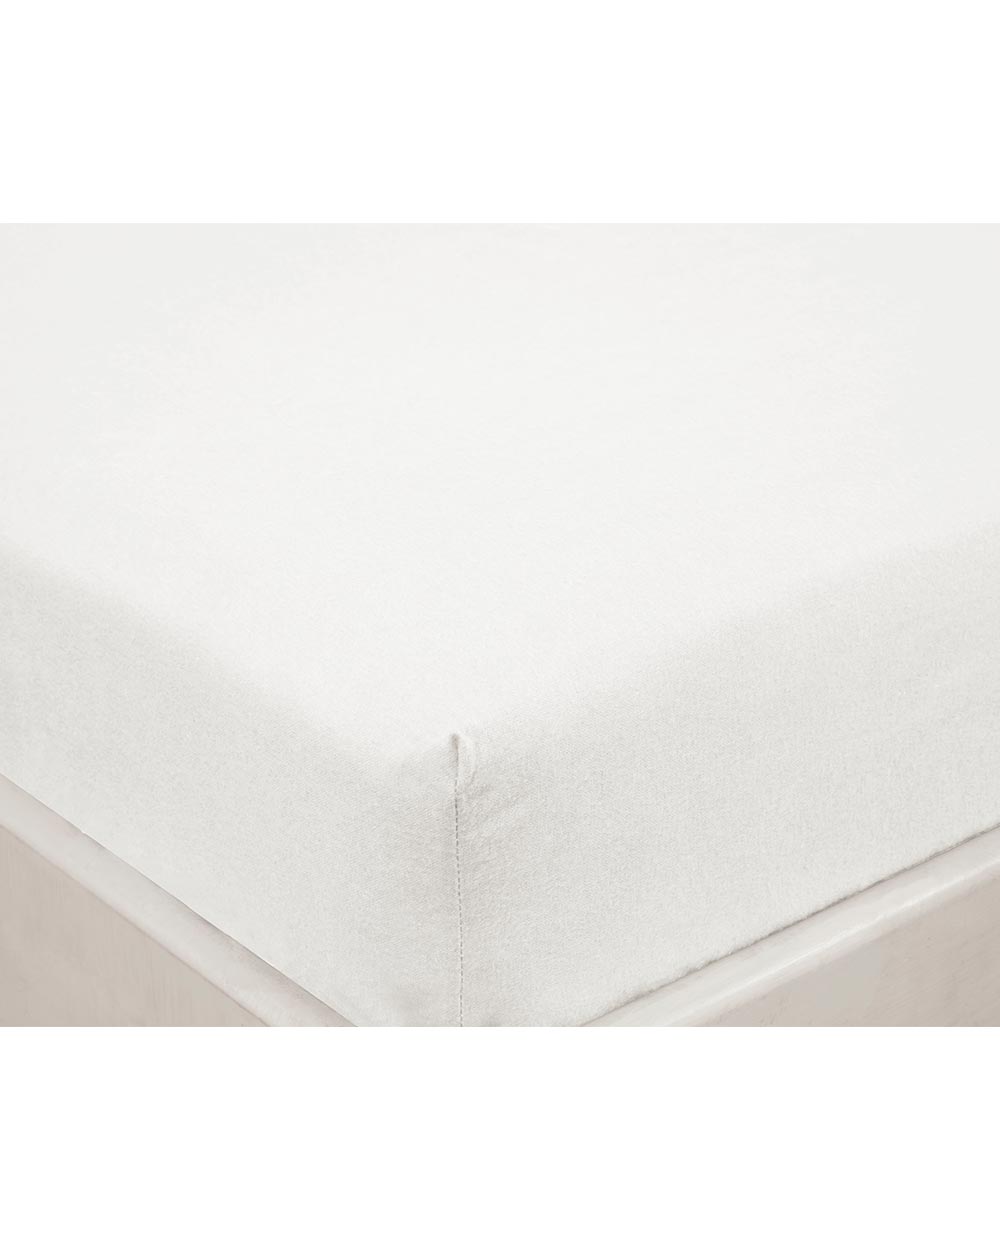 Single Deep Fitted Sheet 100% Bamboo